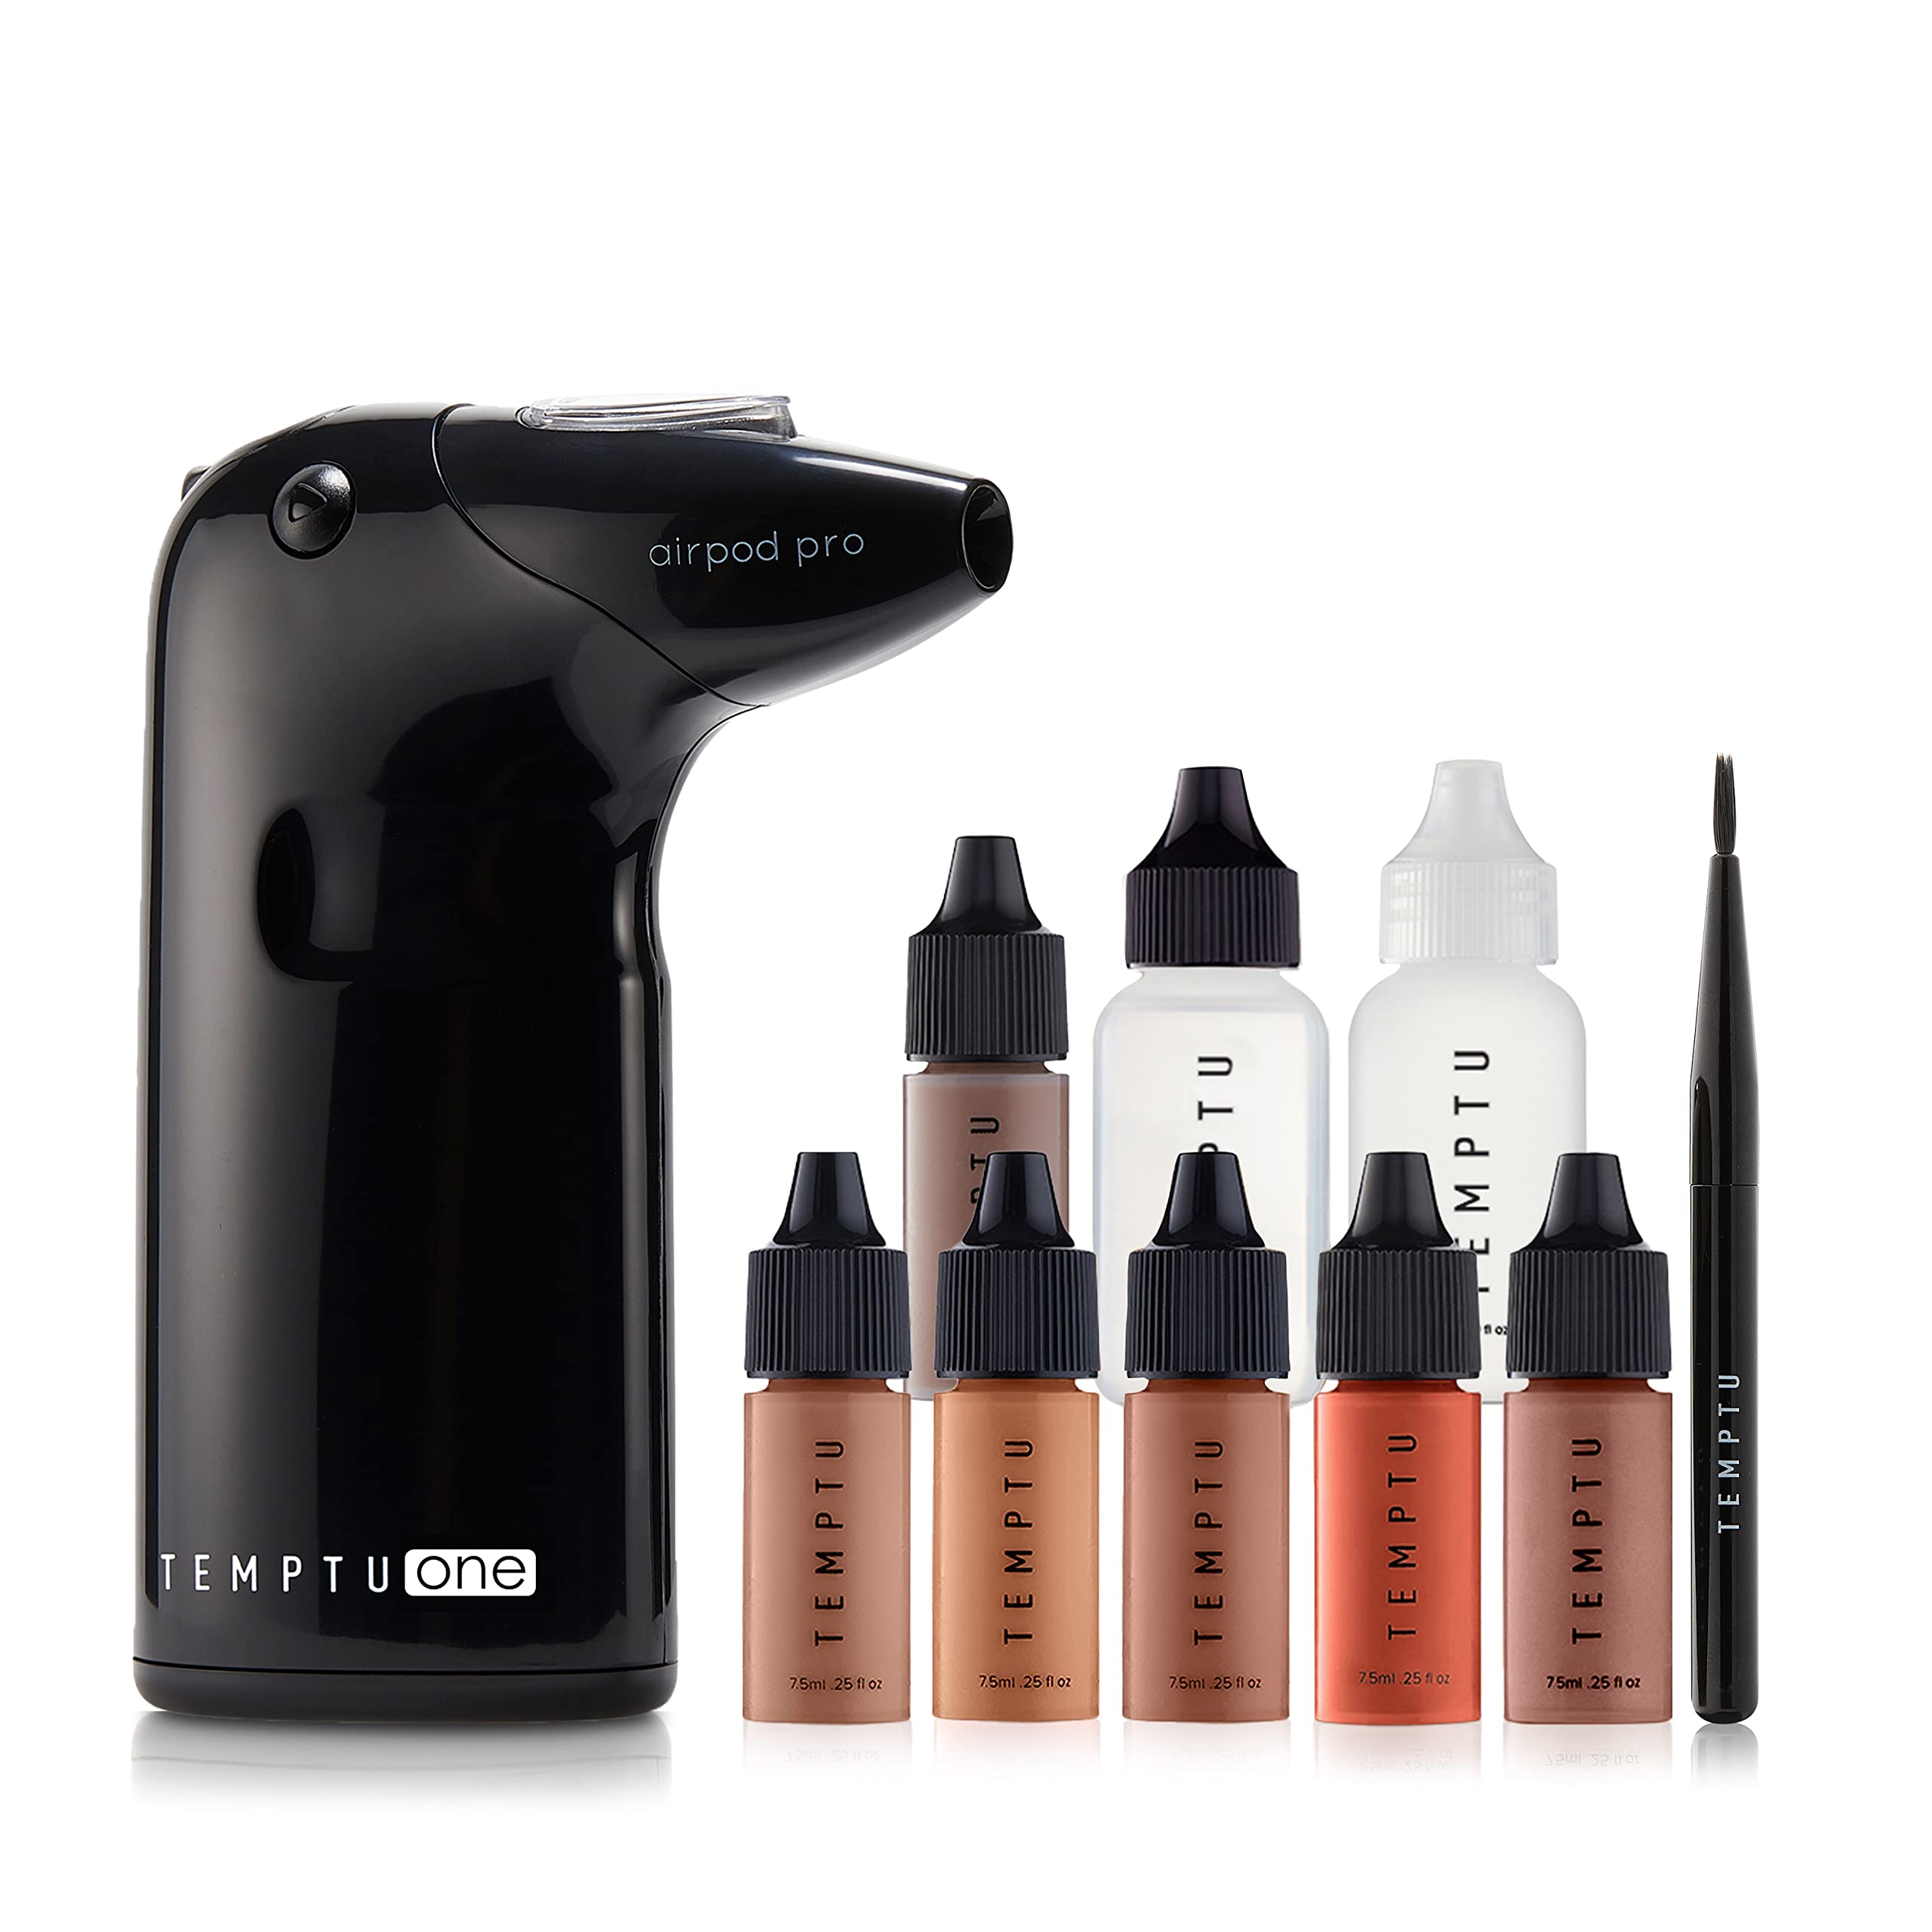 TEMPTU One Airbrush Make-up Kit for Complexion Perfection with Cordless Compressor: 11-Piece Set, Portable Air Brush Machine, 3 Shades of Foundation, Blush, Bronzer, Instant Concealer – 6 Shades